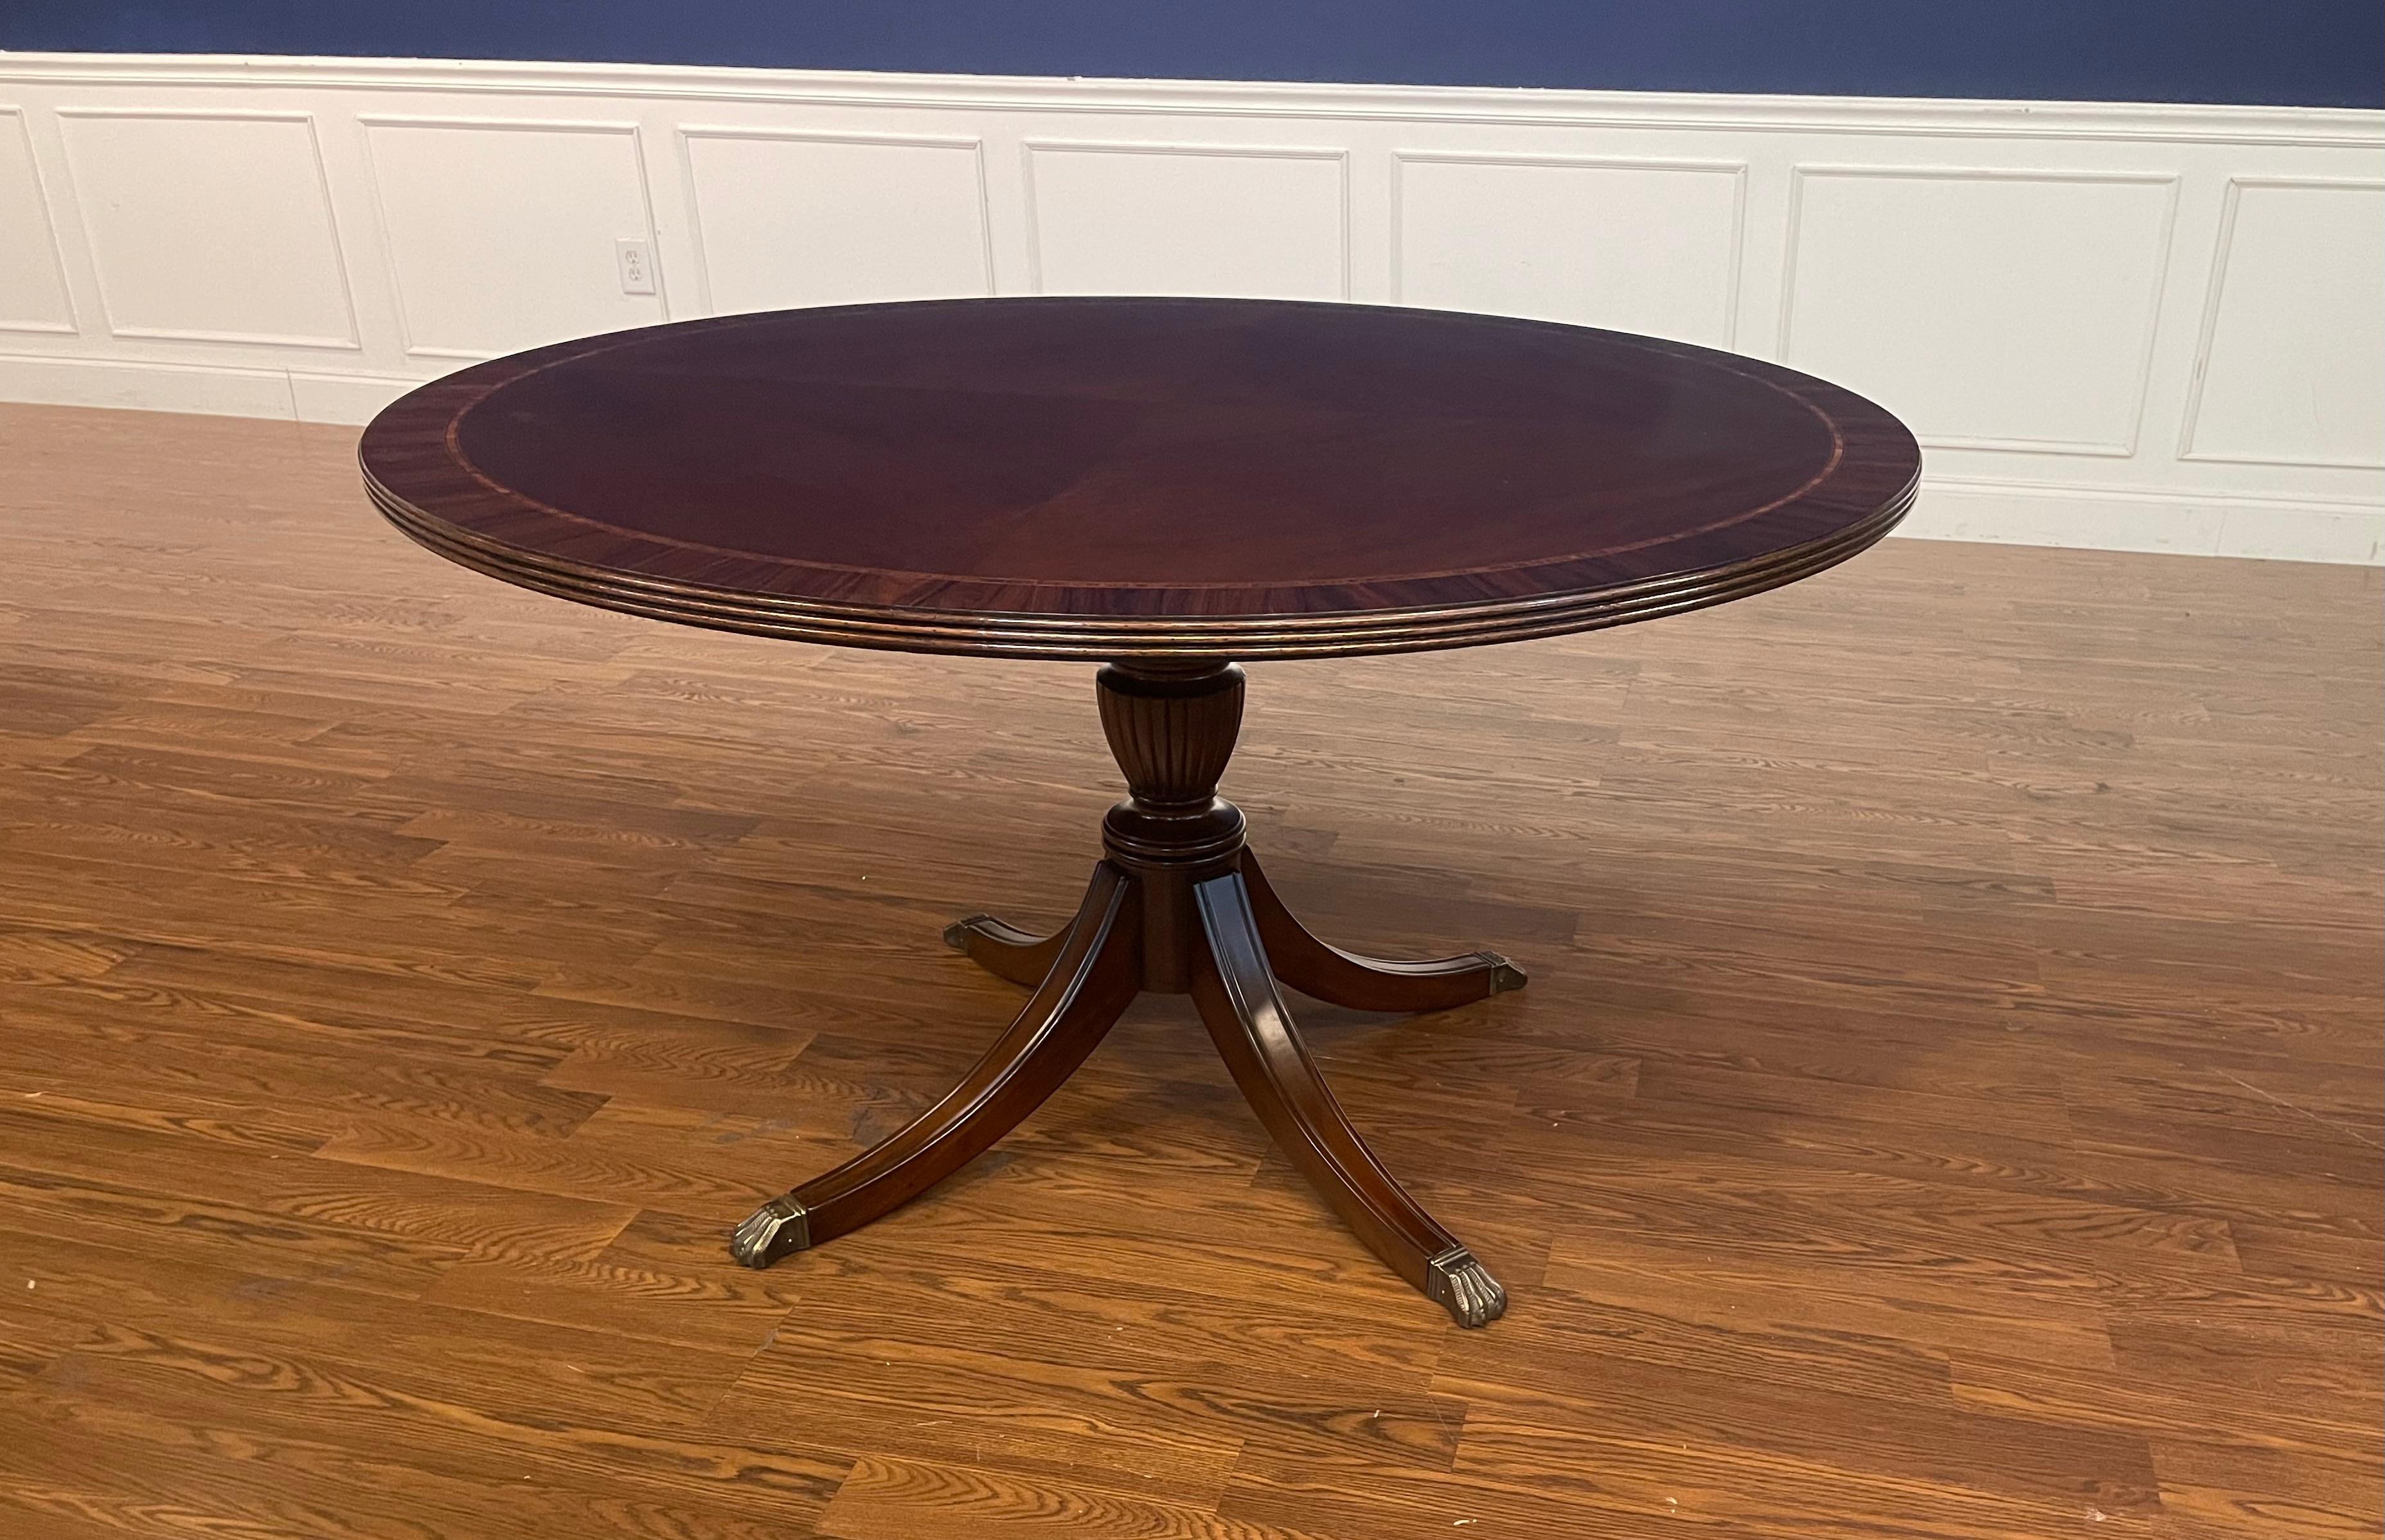 This is a beautiful 54 inch diameter traditional mahogany dining table bench made in the Leighton Hall shop in Suwanee, Georgia.  It is a showroom sample and is less than one year old.  It is in very good condition with only very minor imperfections